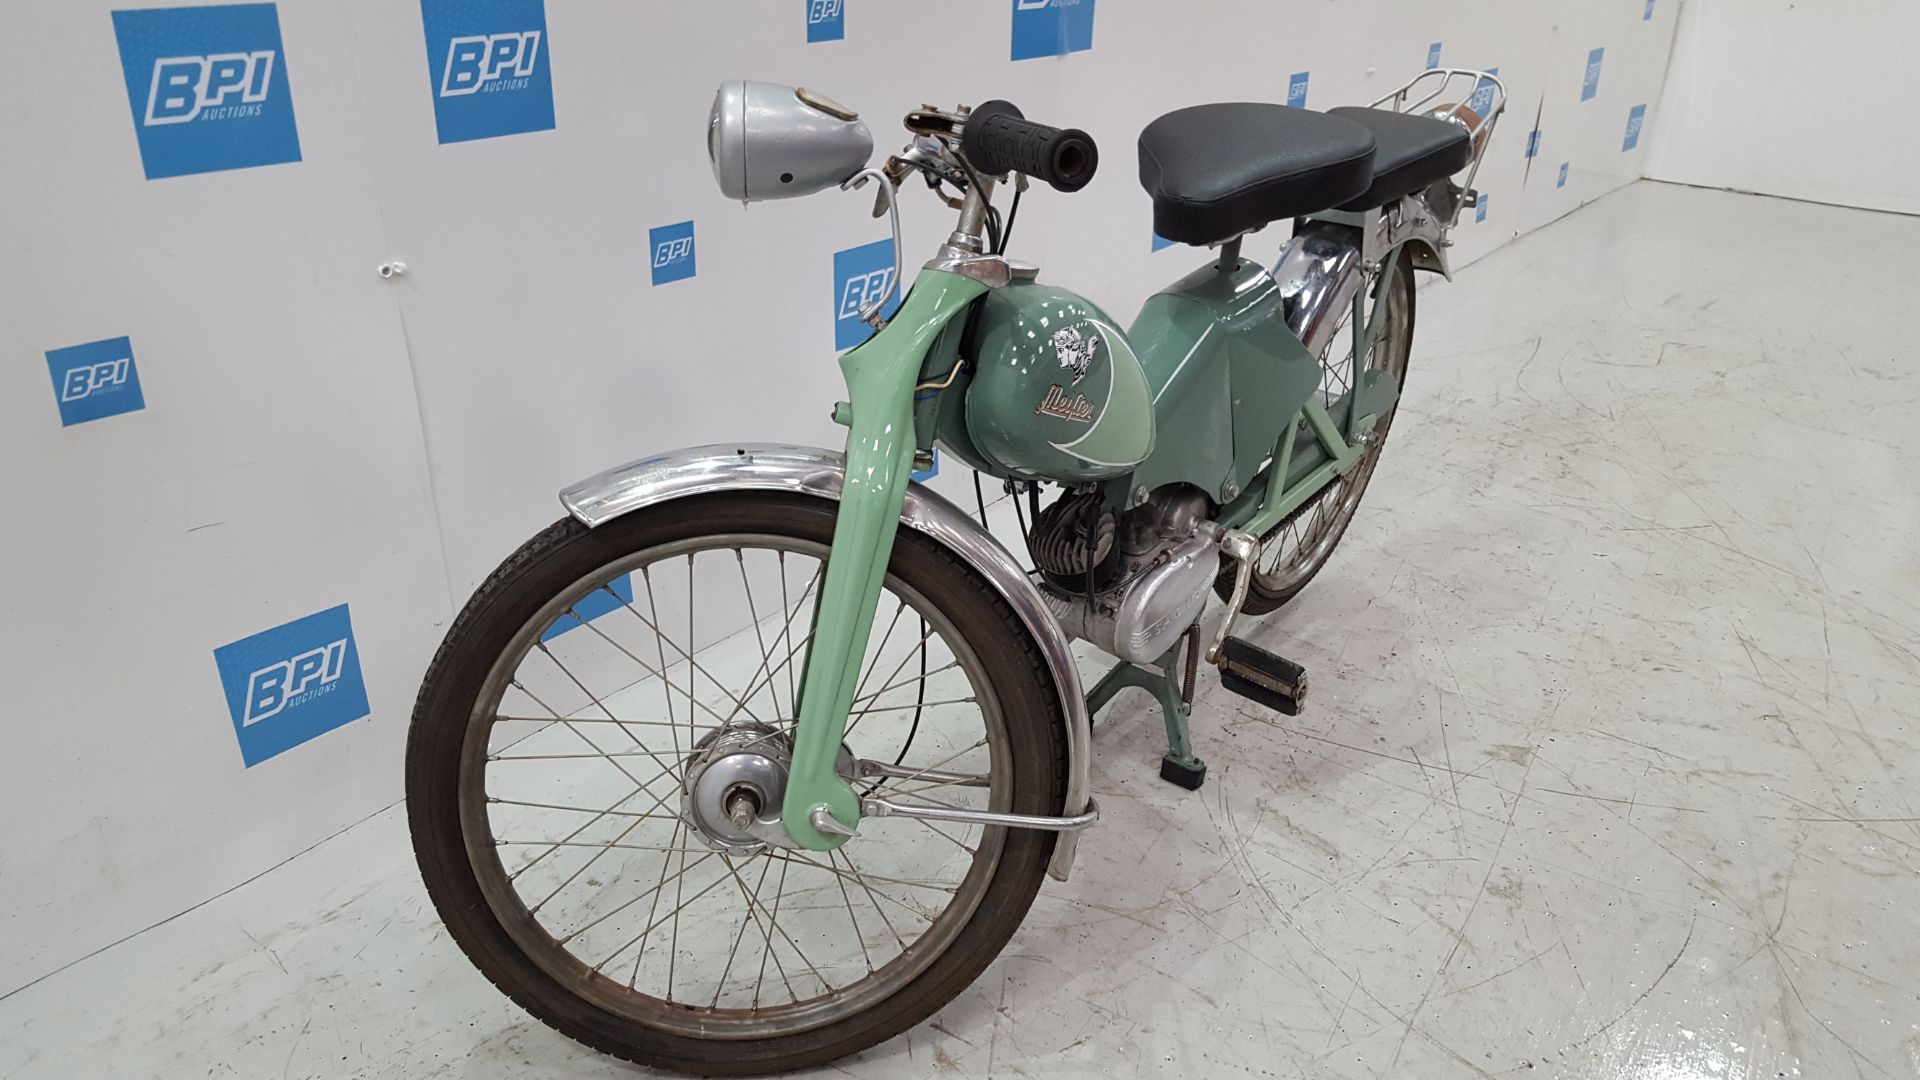 1955 Meister Moped 50cc - Image 5 of 10